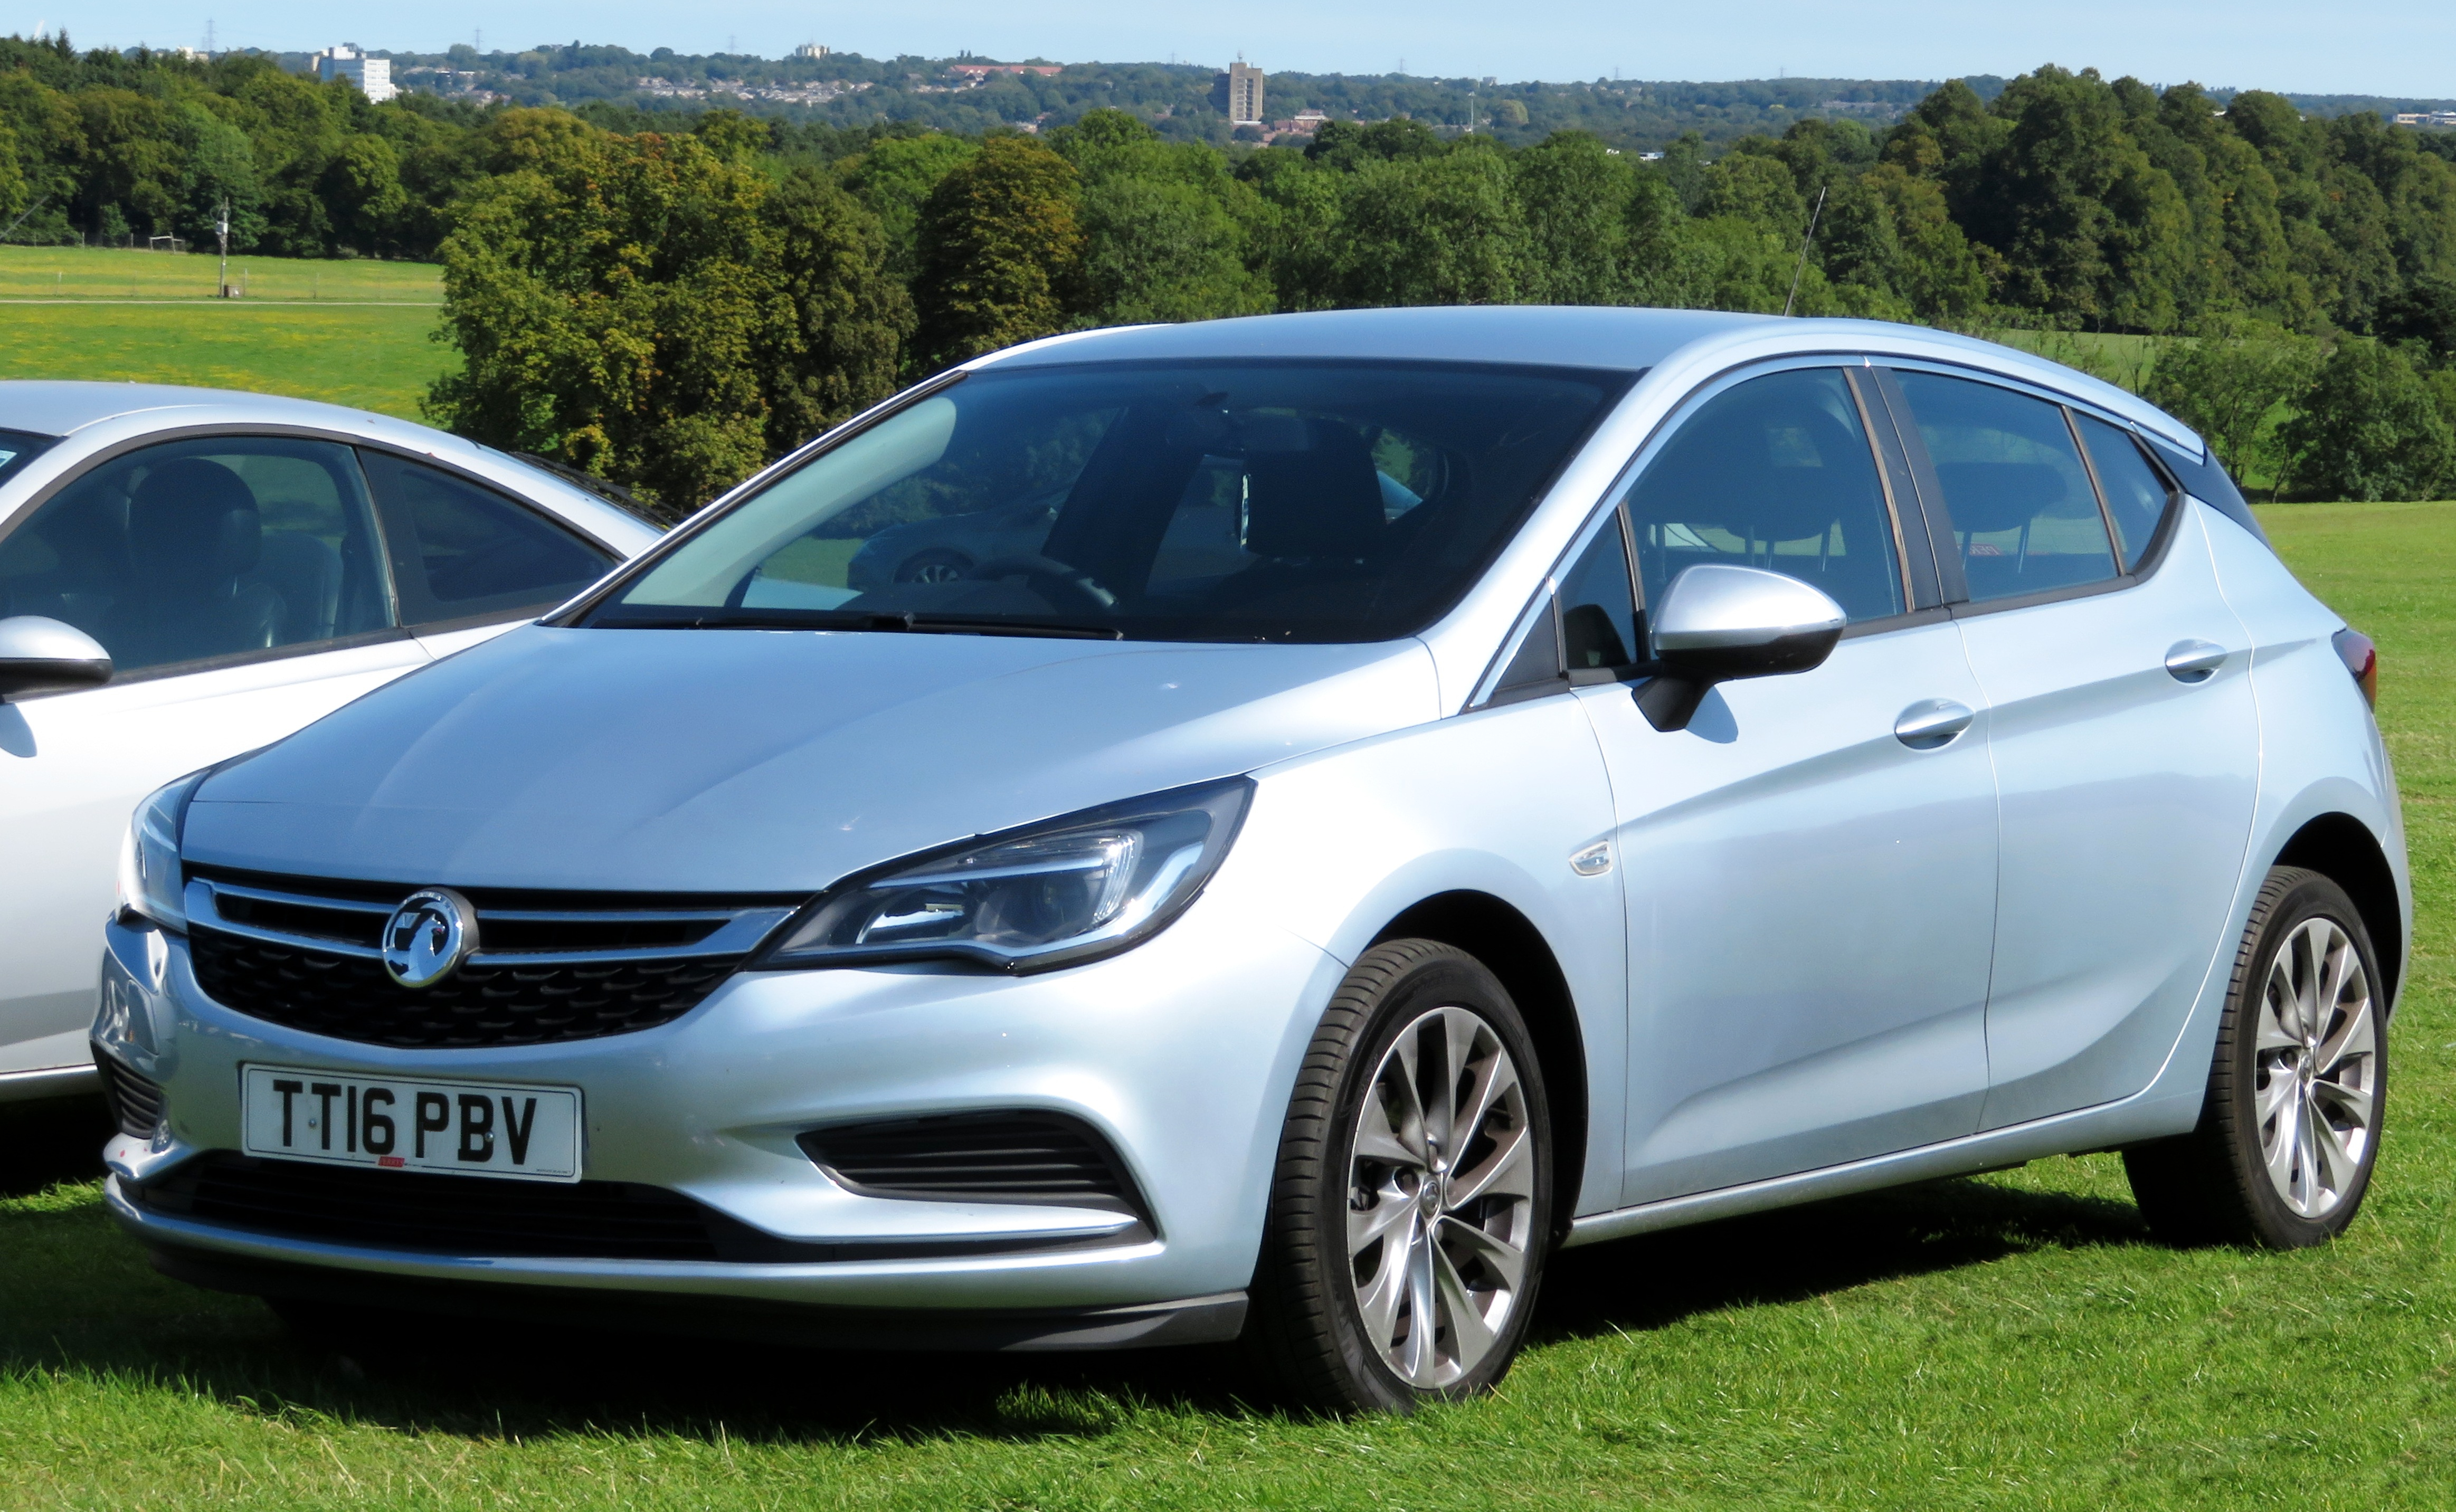 Opel Astra Hatchback hd specifications